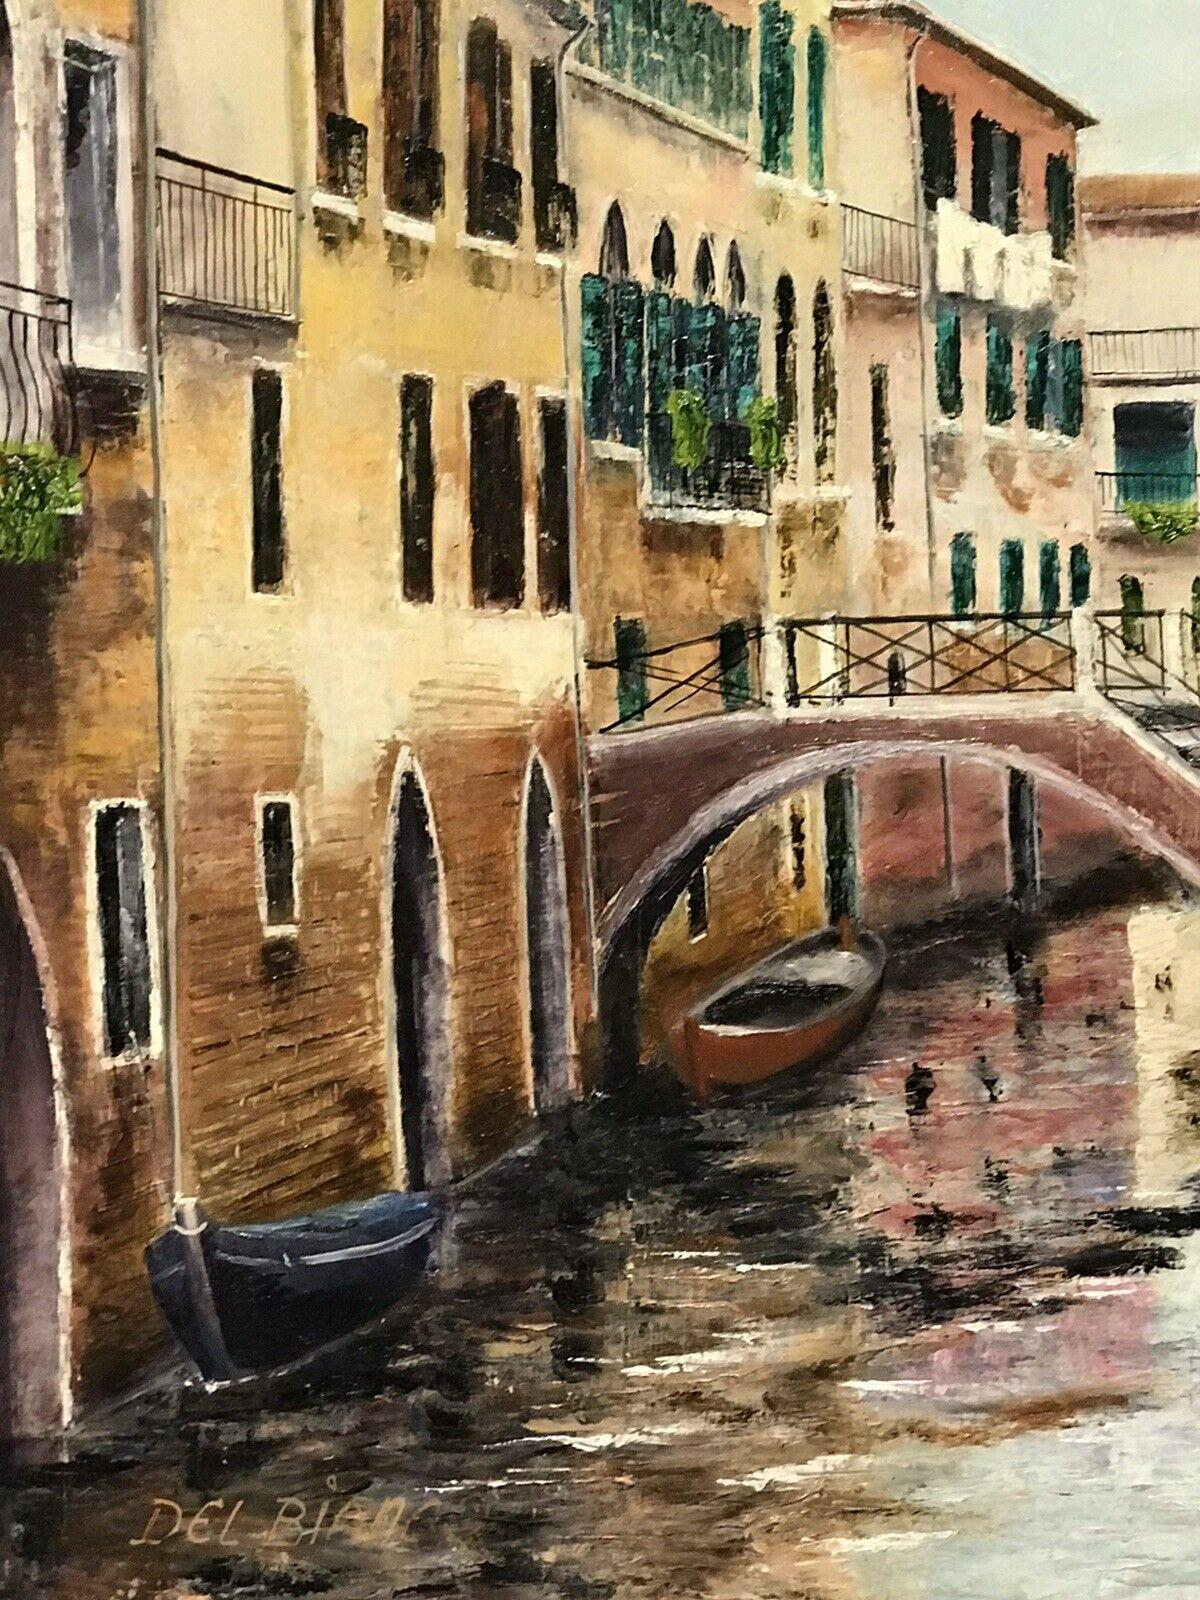 Artist: Louis del Bianco (French b.1925), signed

Title: The Tranquil Canal, Venice

Medium: oil painting on canvas, unframed 

Size:  painting: 24 x 19.5 inches
        
Provenance: private collection, France

Condition: The painting is in very